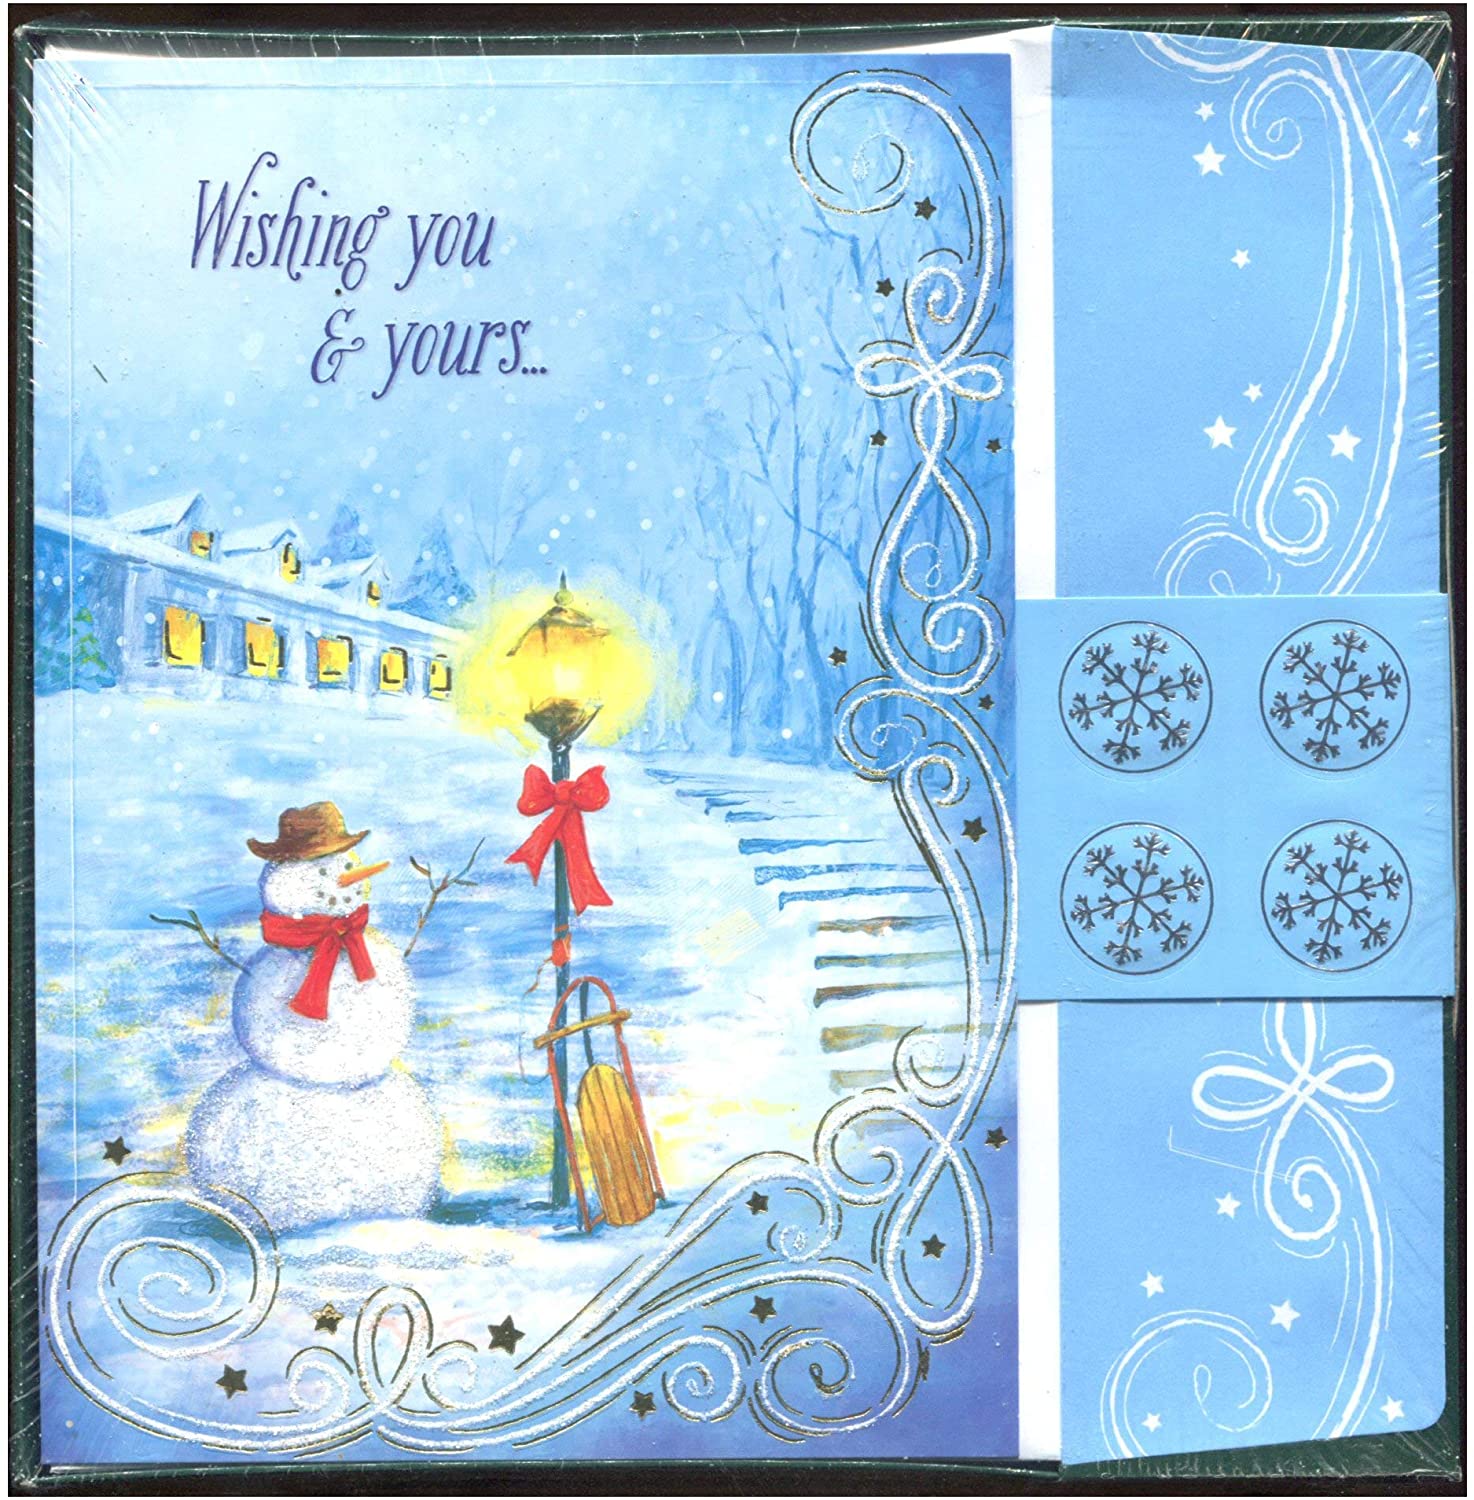 Box 15 "Special Thoughts” Non-Religious Christmas Cards. Snowman